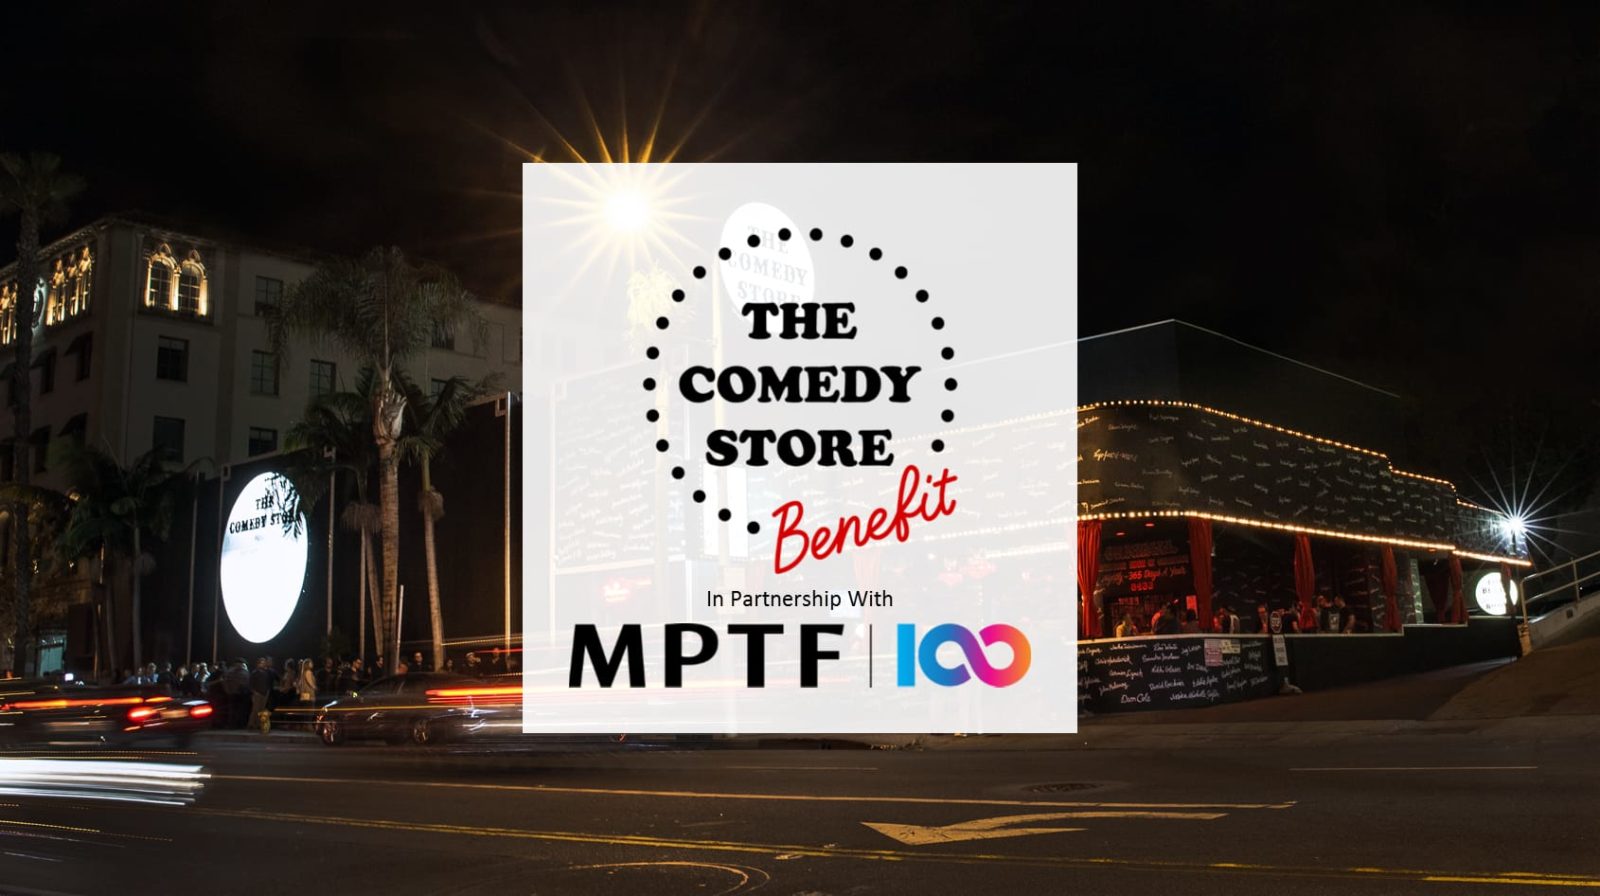 The Comedy Store in partnership with MPTF